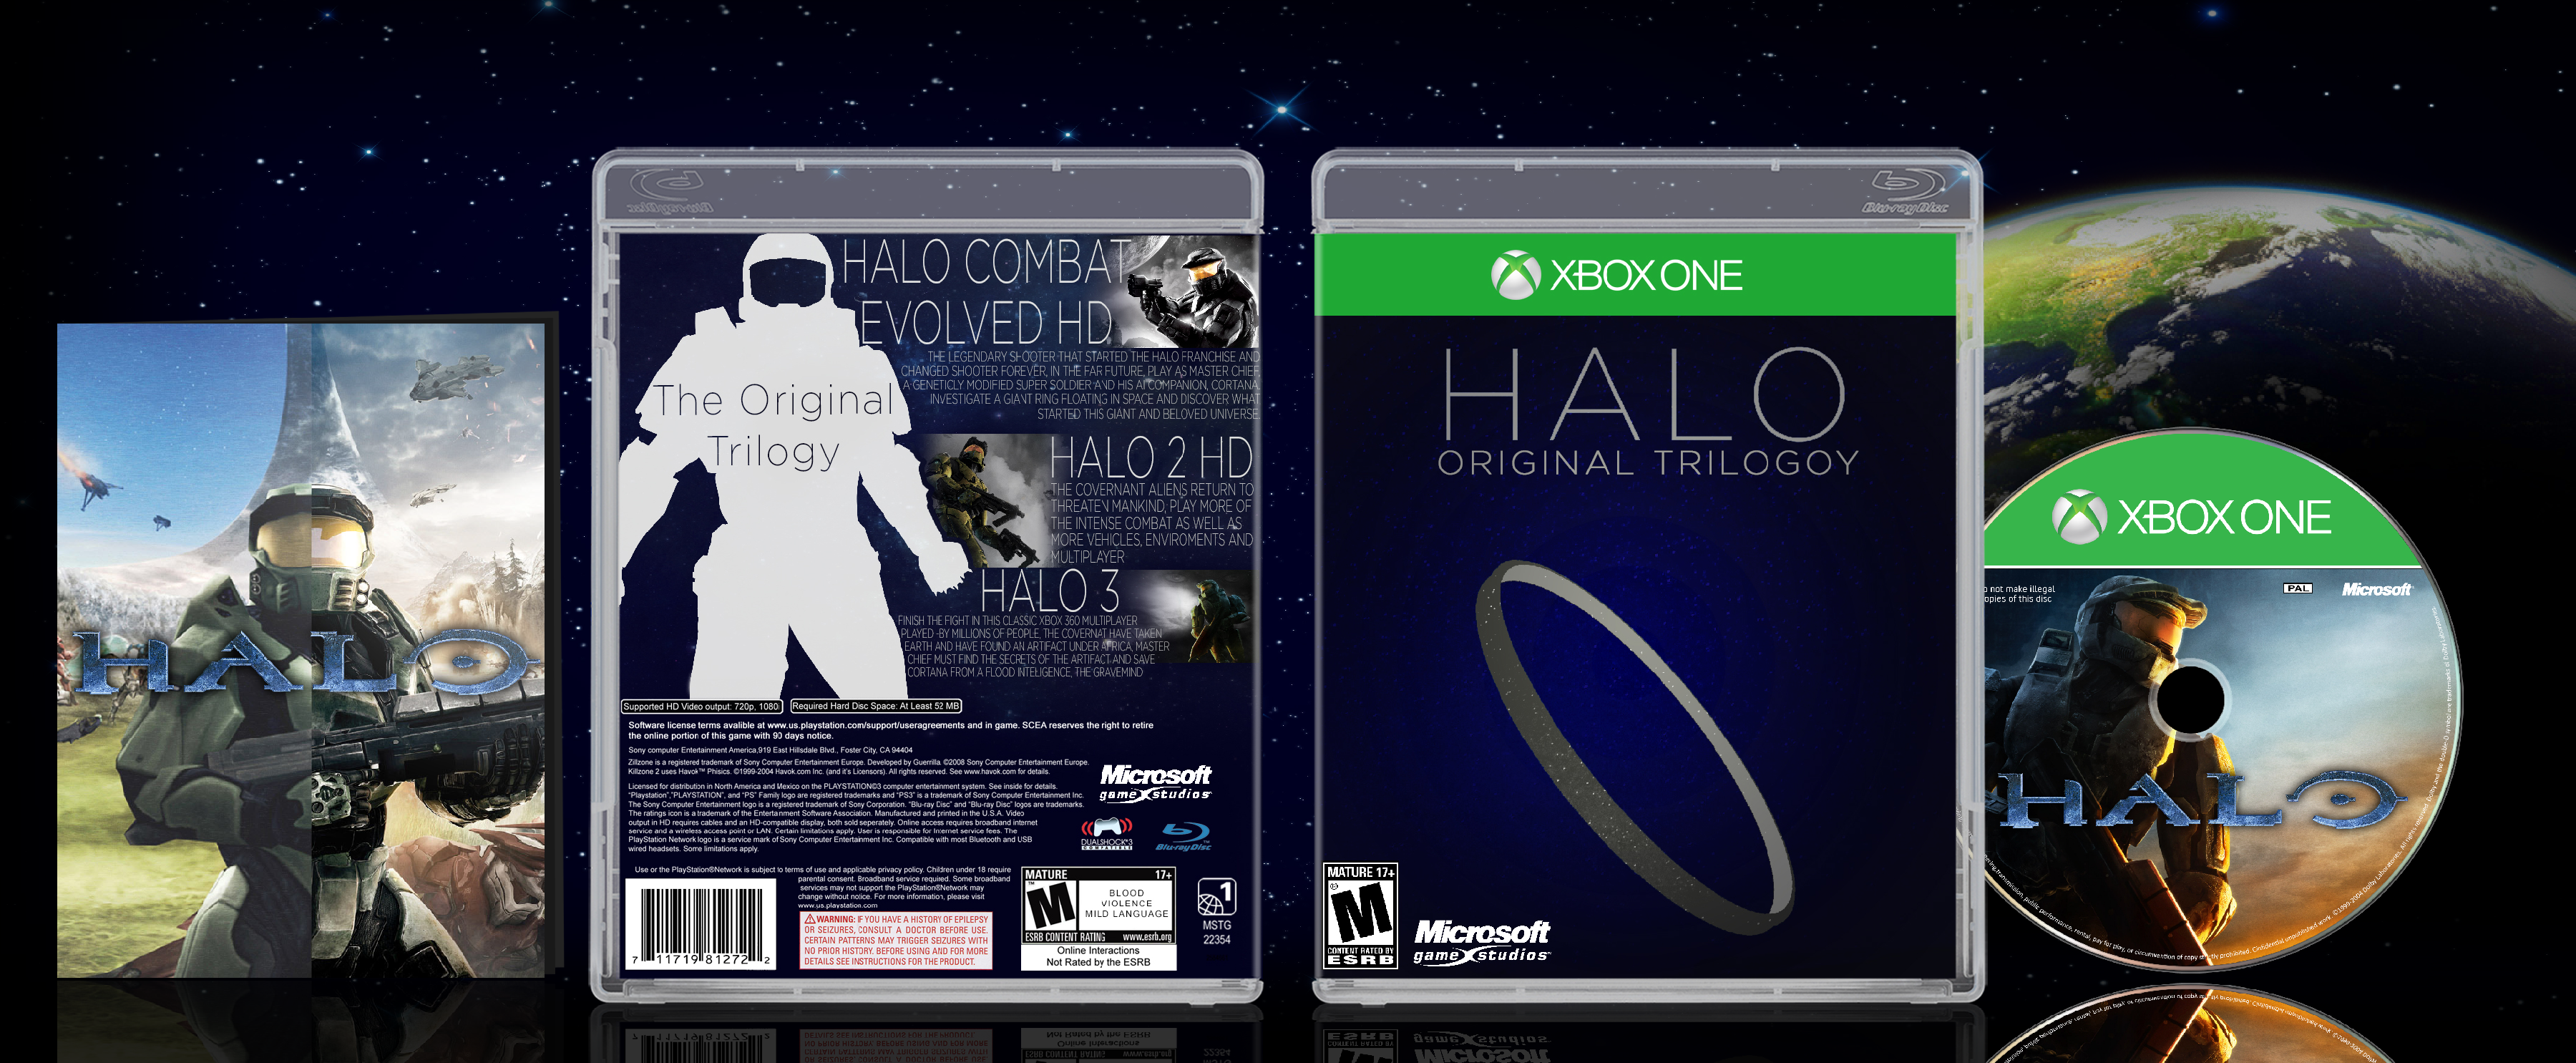 Halo Trilogy box cover